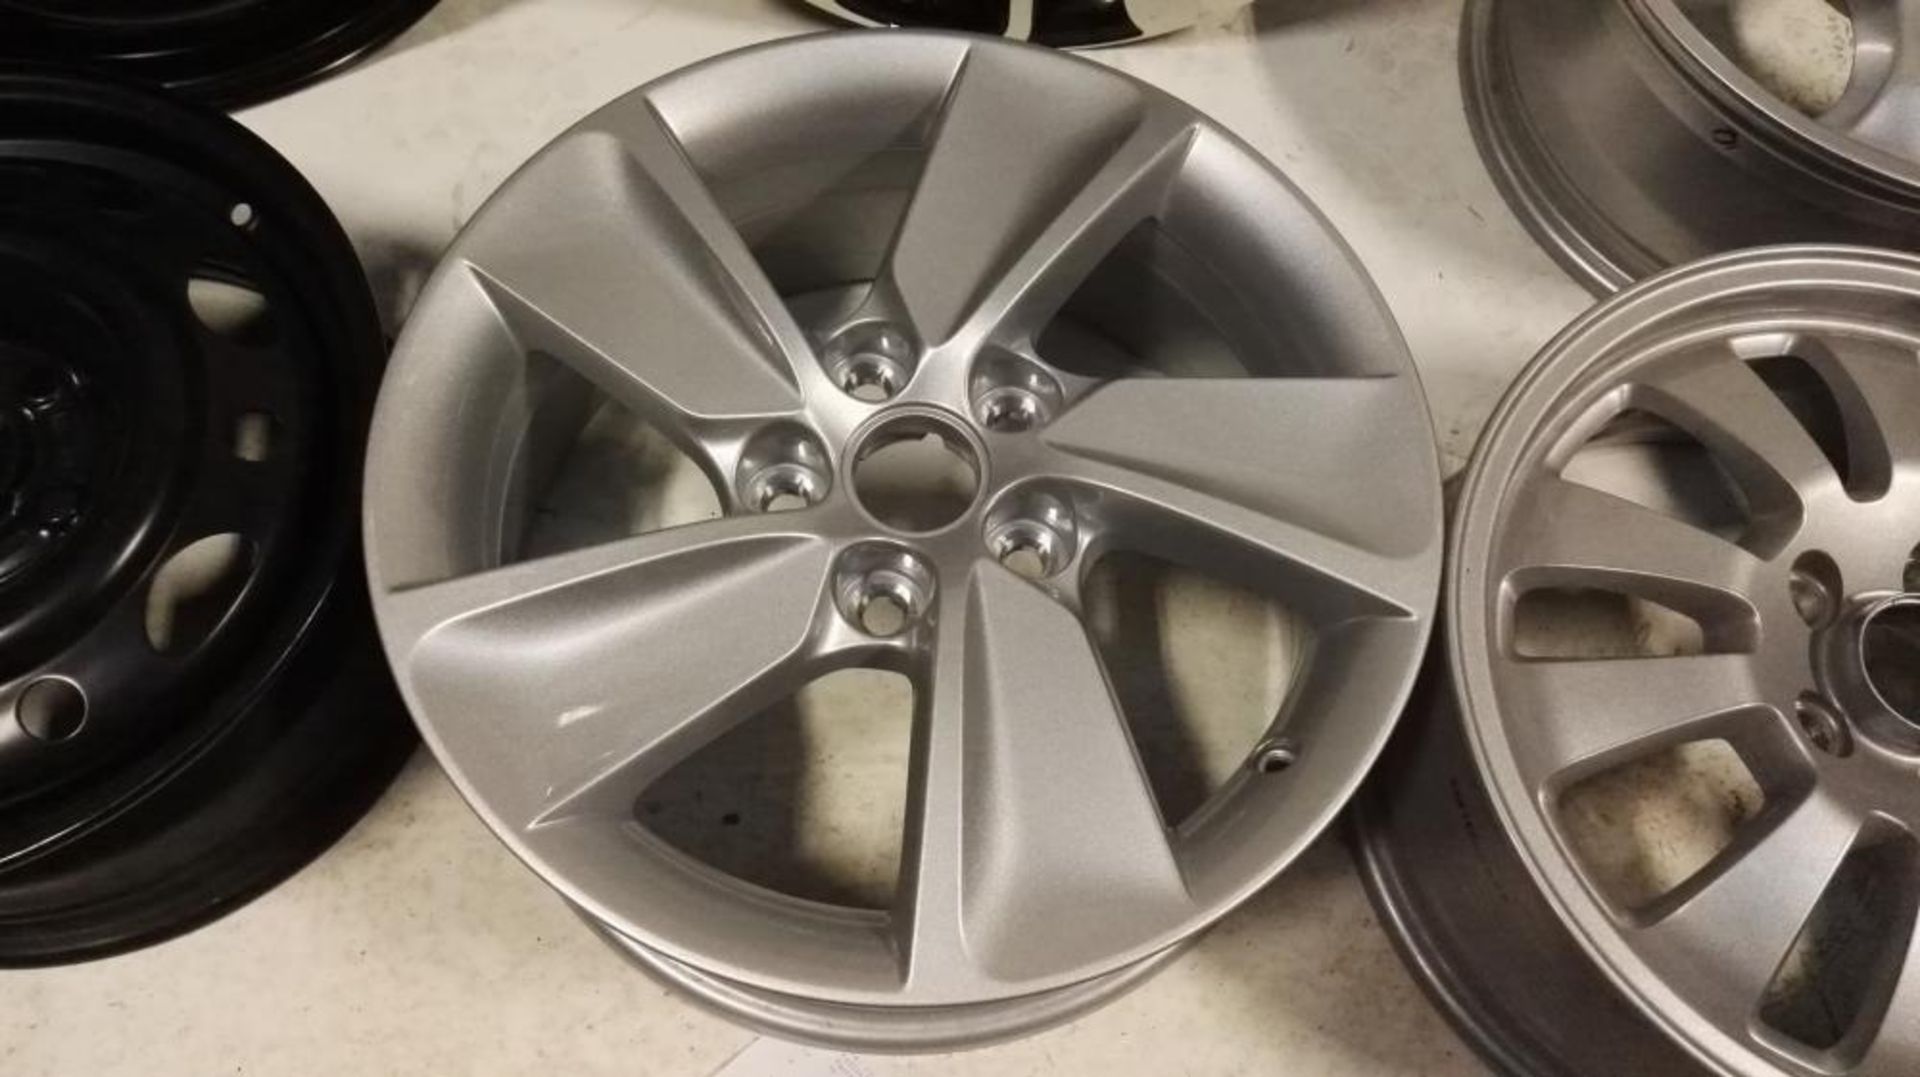 8 x Assorted Alloy Wheels - 15" to 17" - Saab, Opel, Vauxhall, Renault, BBS - CL084 - Location: Altr - Image 6 of 9